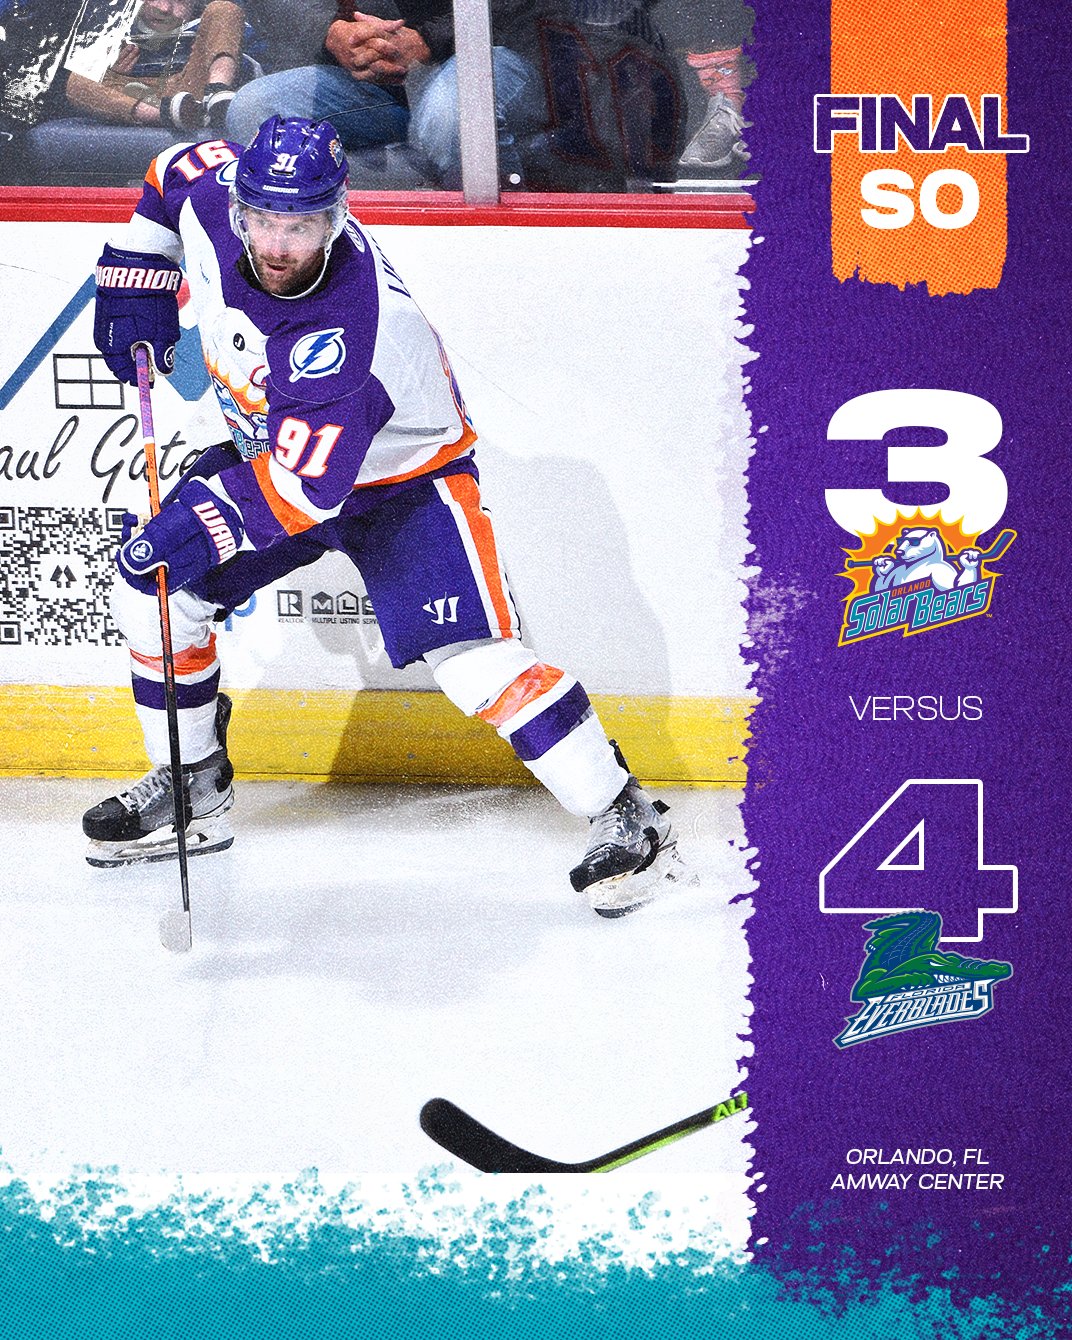 Game Preview: Solar Bears at Everblades, Dec. 5, 2020